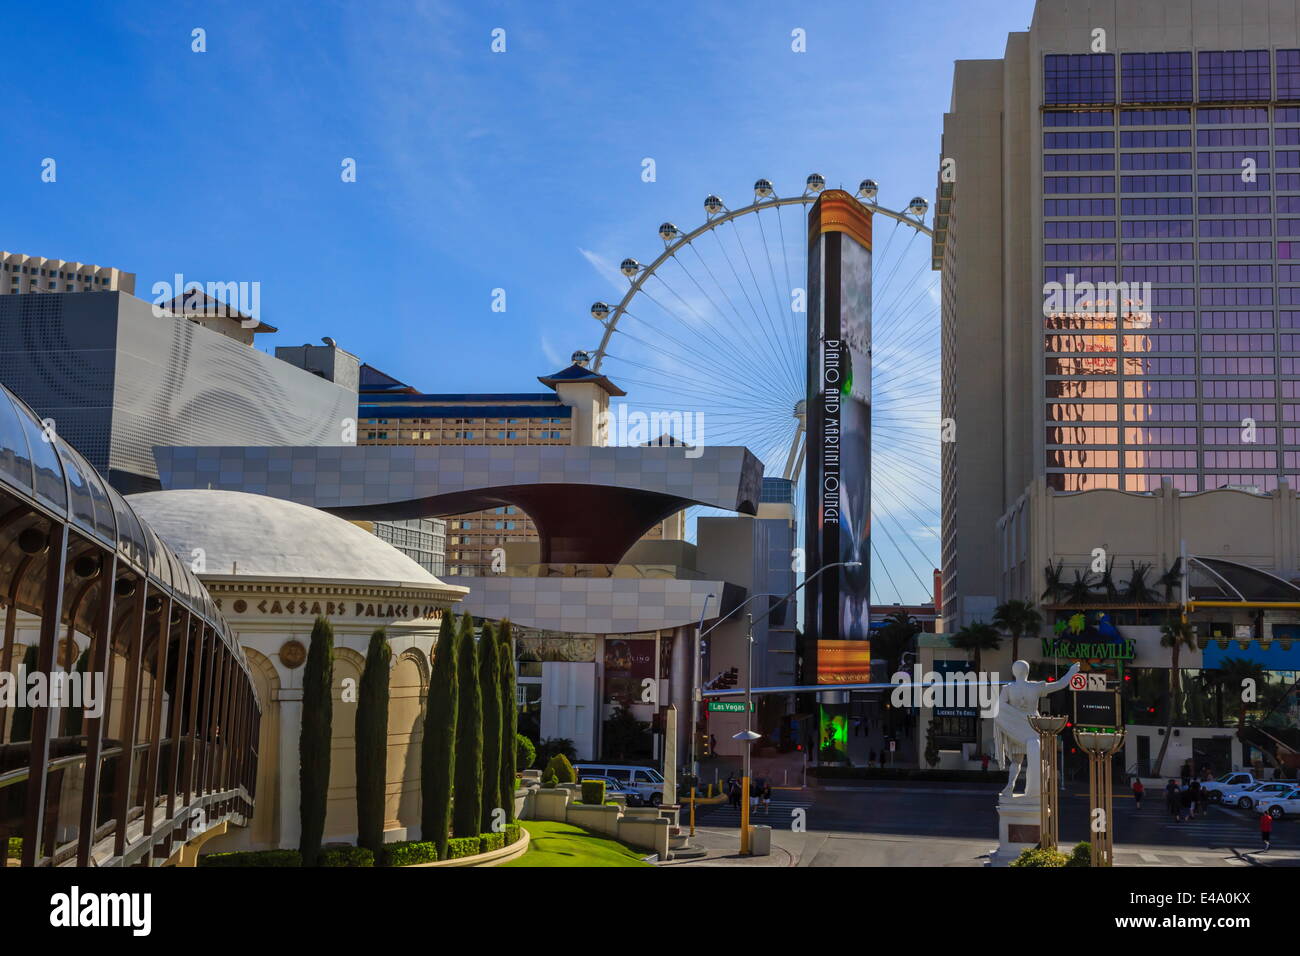 View across The Strip from Caesars, with Caesars walkway and High Roller Observation Wheel, Las Vegas, Nevada, USA Stock Photo